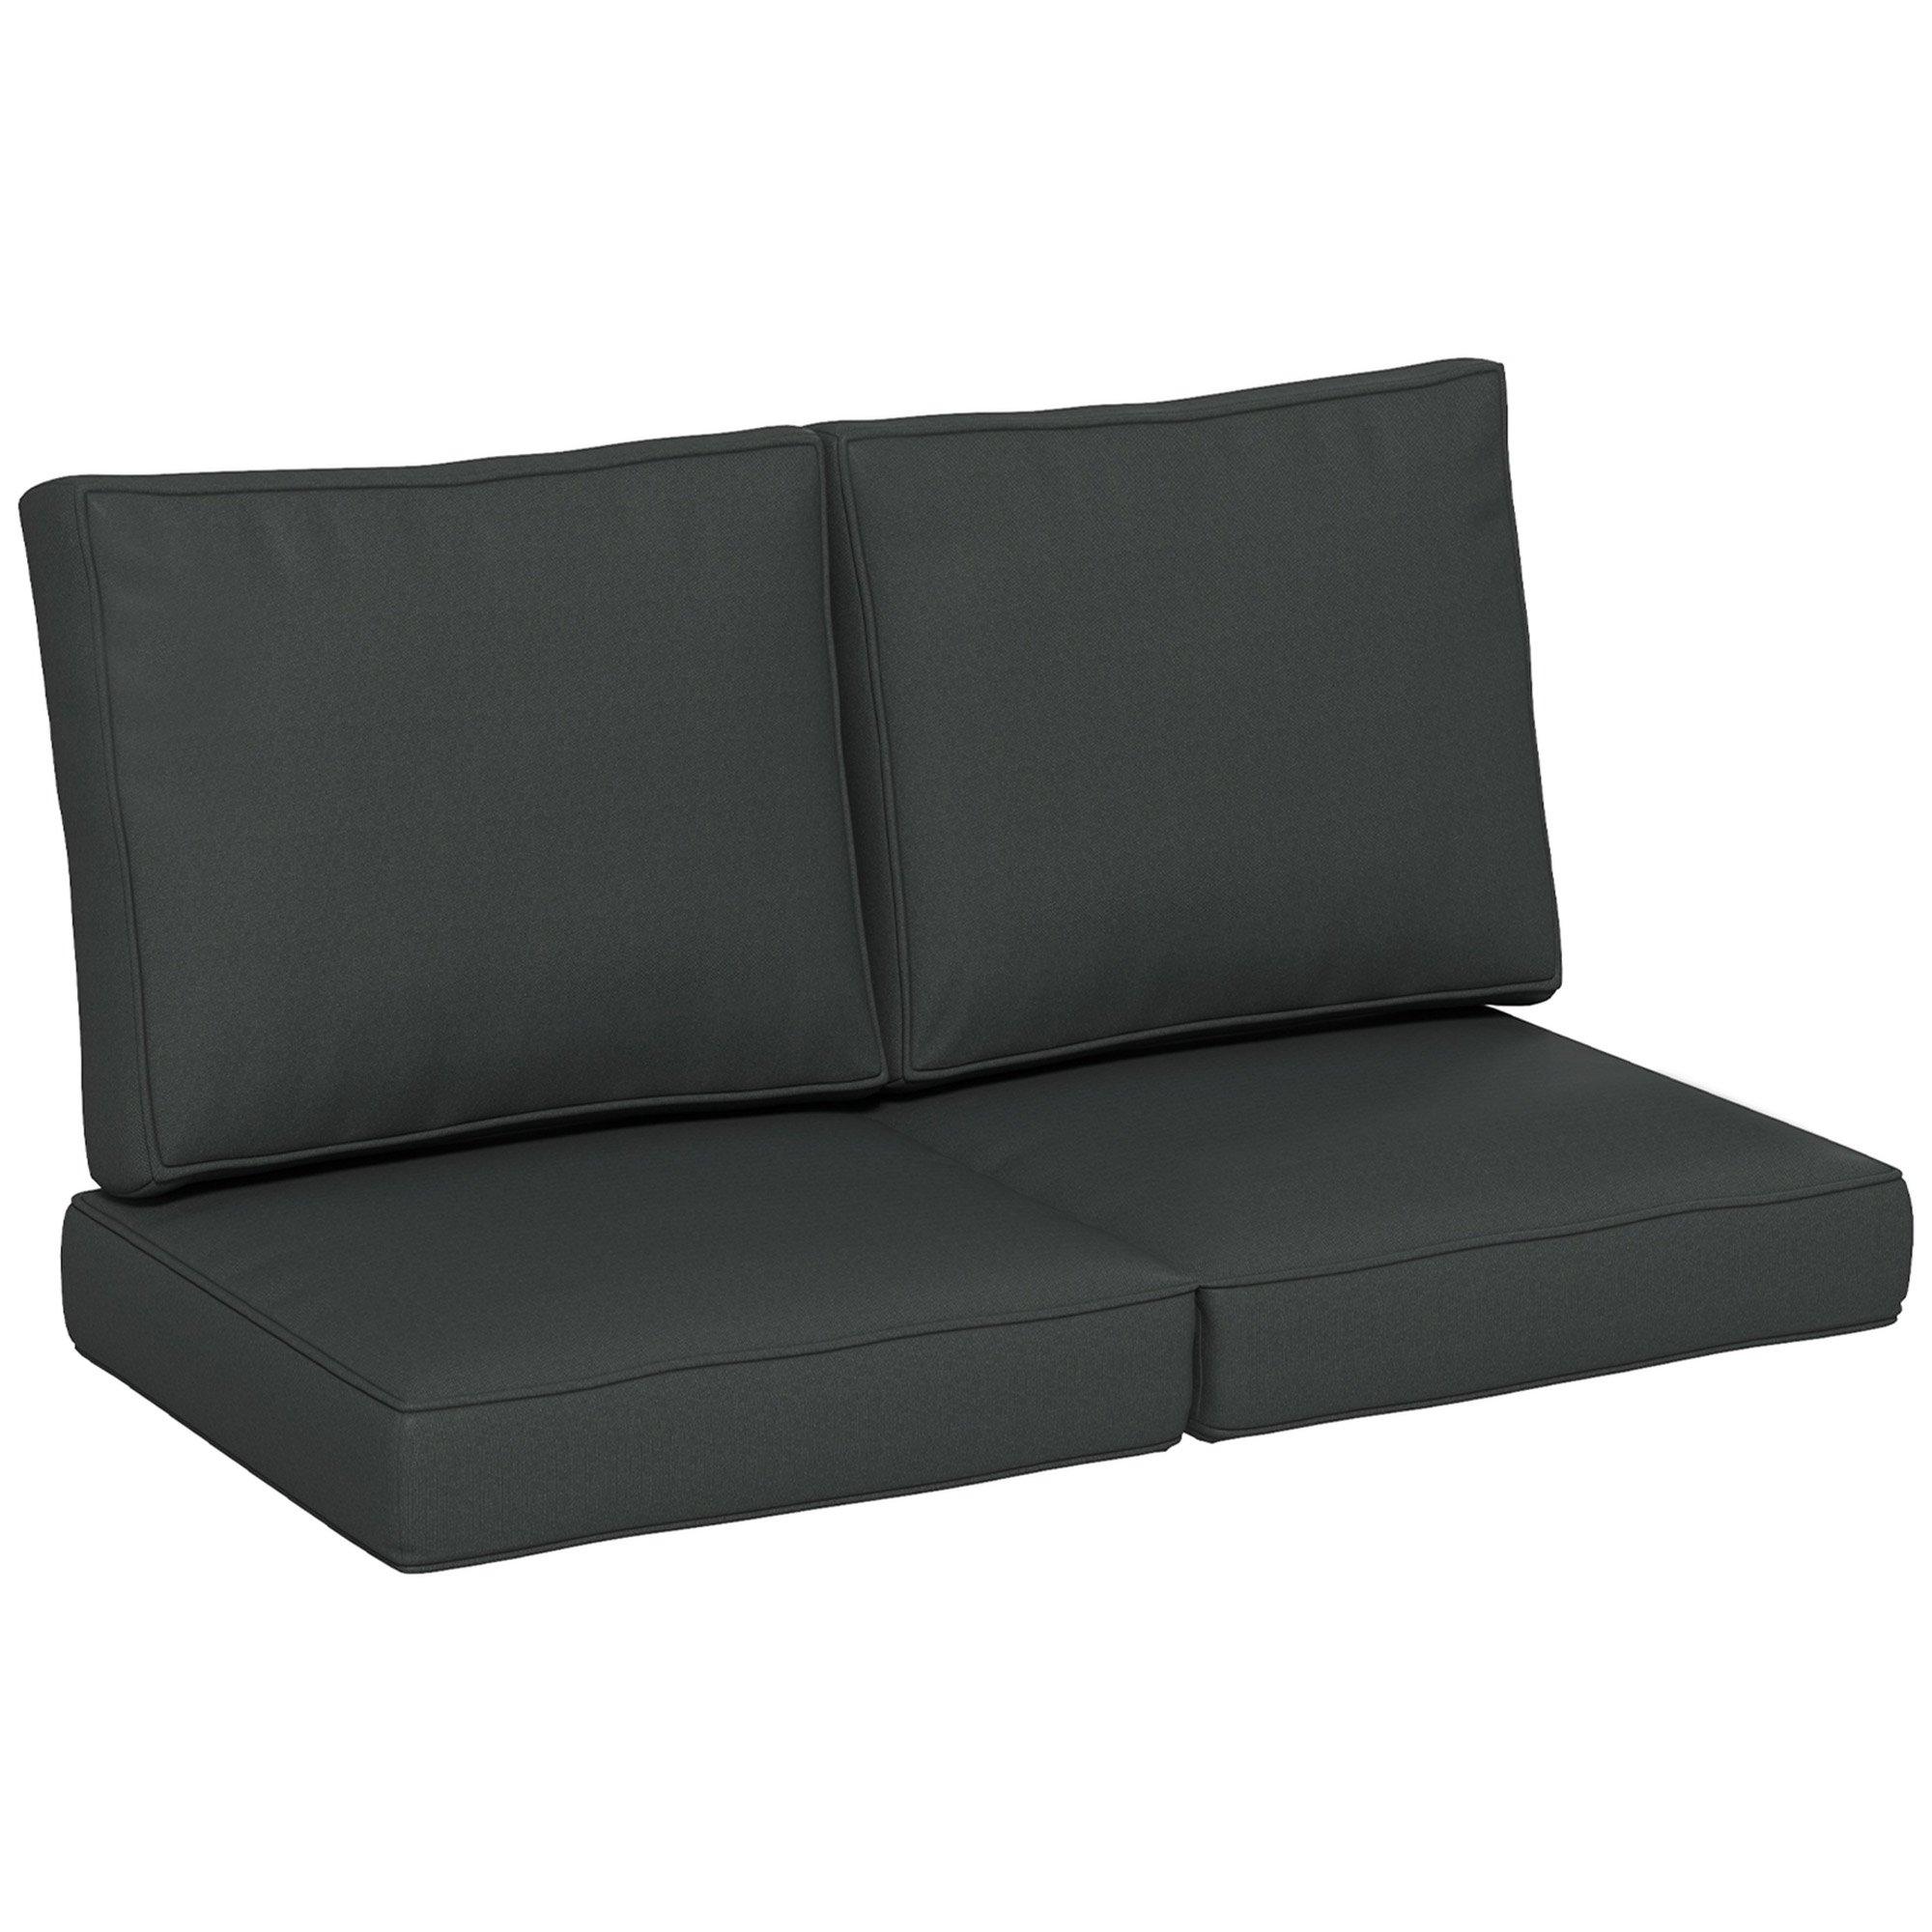 Set of 3 Replacement Back and Seat Cushions for Outdoor, Charcoal Grey